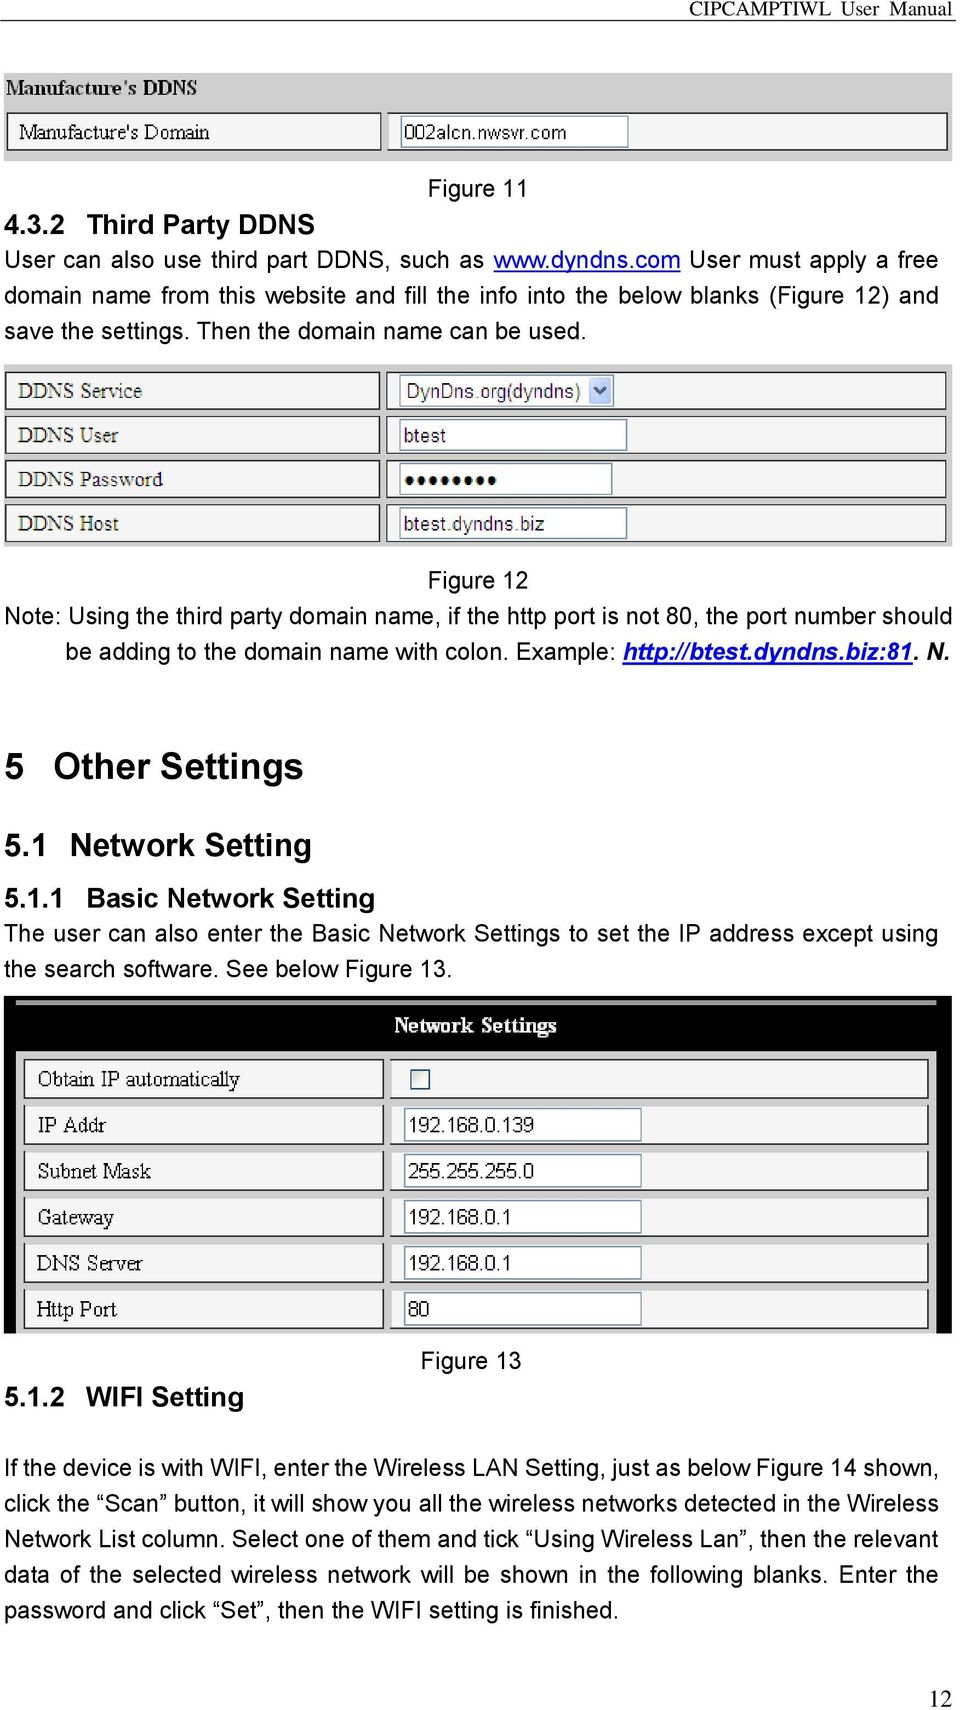 Figure 12 Note: Using the third party domain name, if the http port is not 80, the port number should be adding to the domain name with colon. Example: http://btest.dyndns.biz:81. N. 5 Other Settings 5.